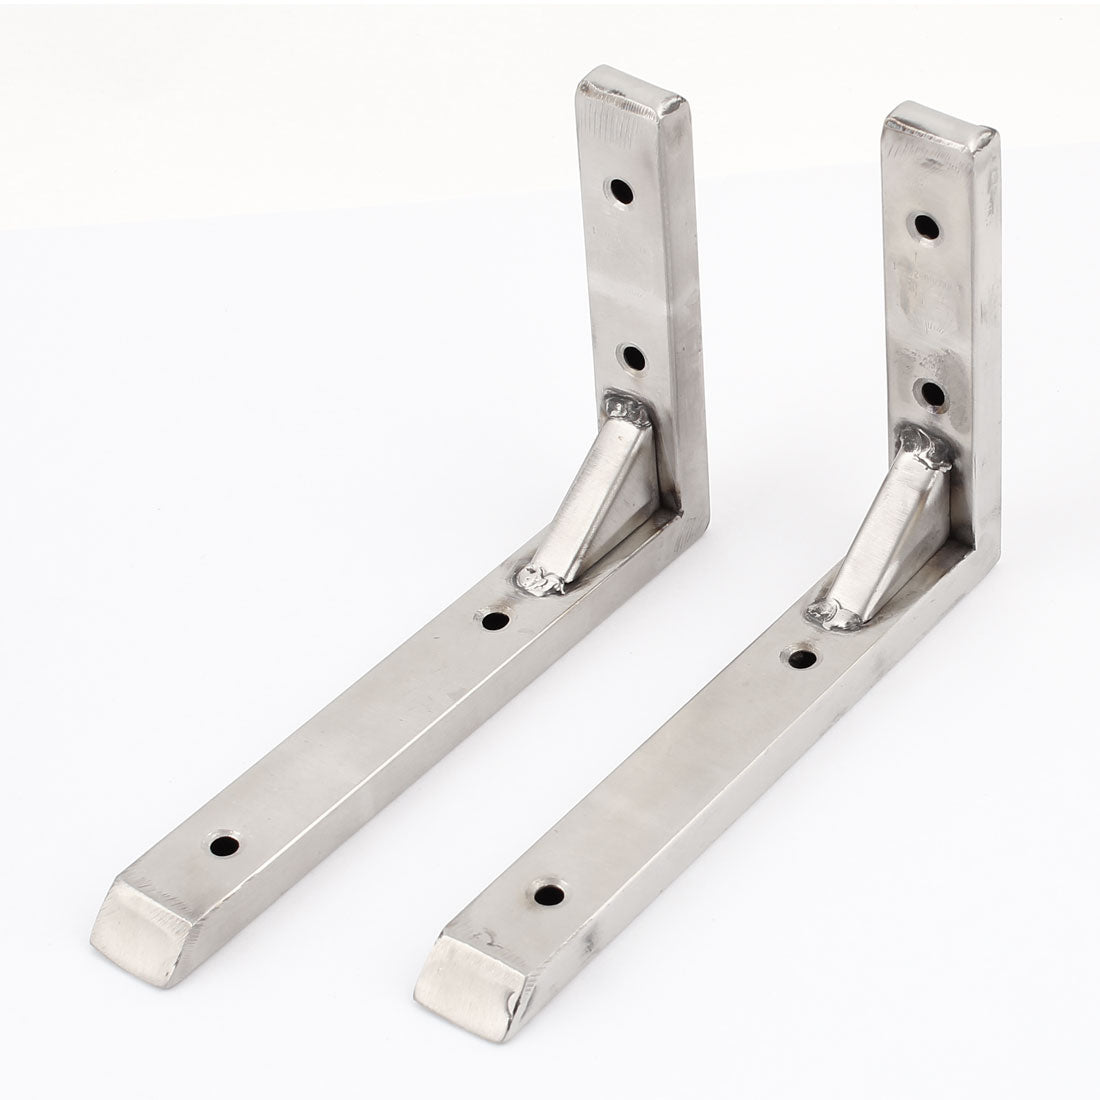 uxcell Uxcell 2 Pcs Stainless Steel L Shaped Angle Bracket Corner Brace Supports 150mm x 100mm